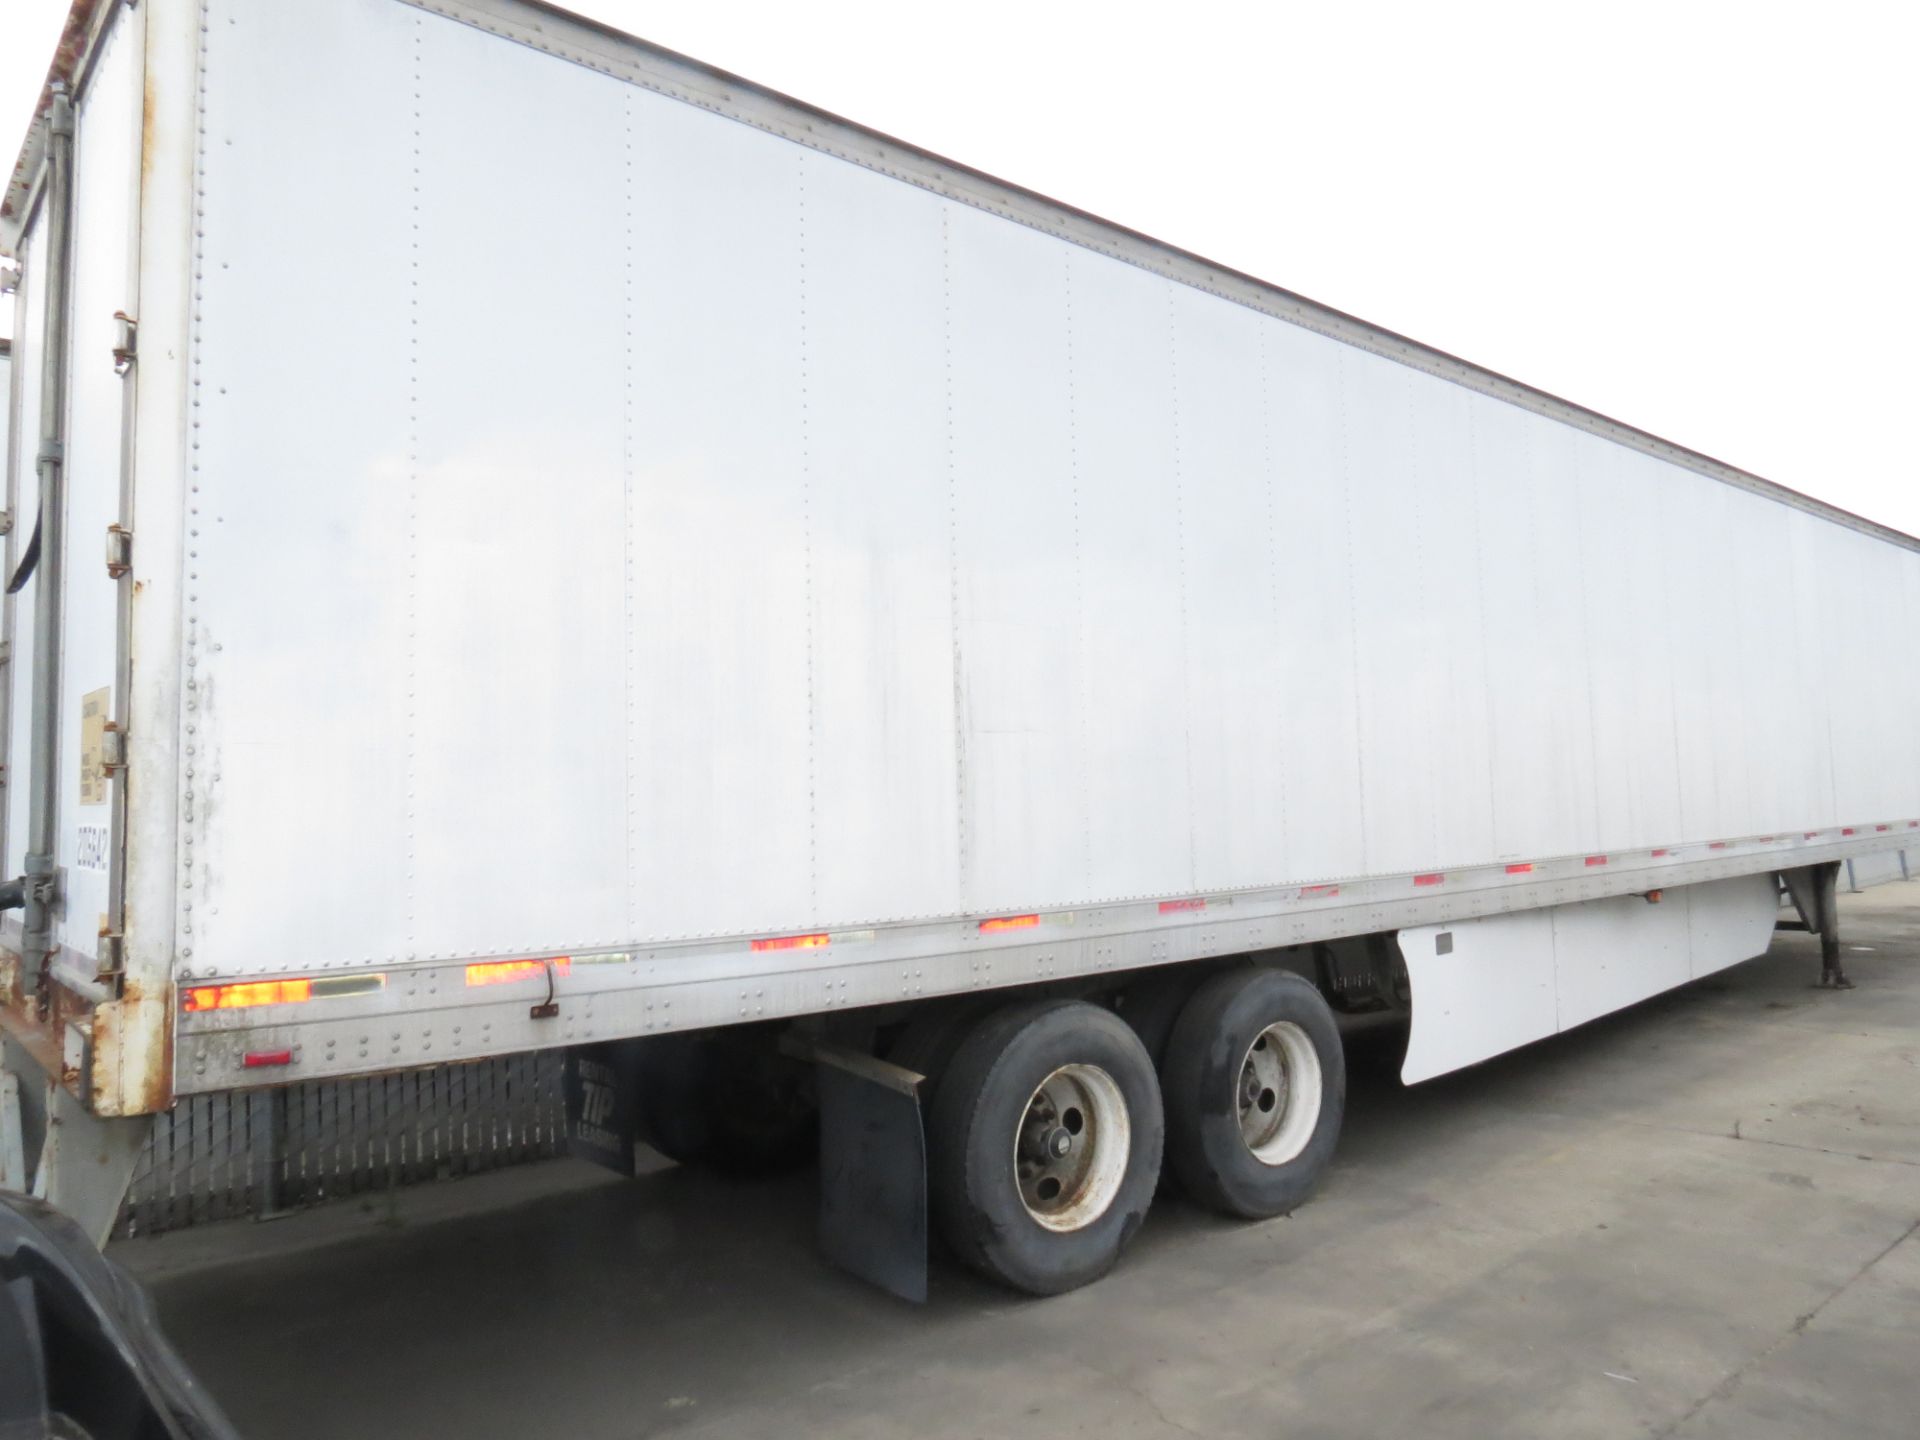 1997 Trailmobile 53' Thermo King Smart Reefer #3 Trailer, Model - 01AC-1UAY, VIN: 1PT01ACHXW9001357, - Image 4 of 9